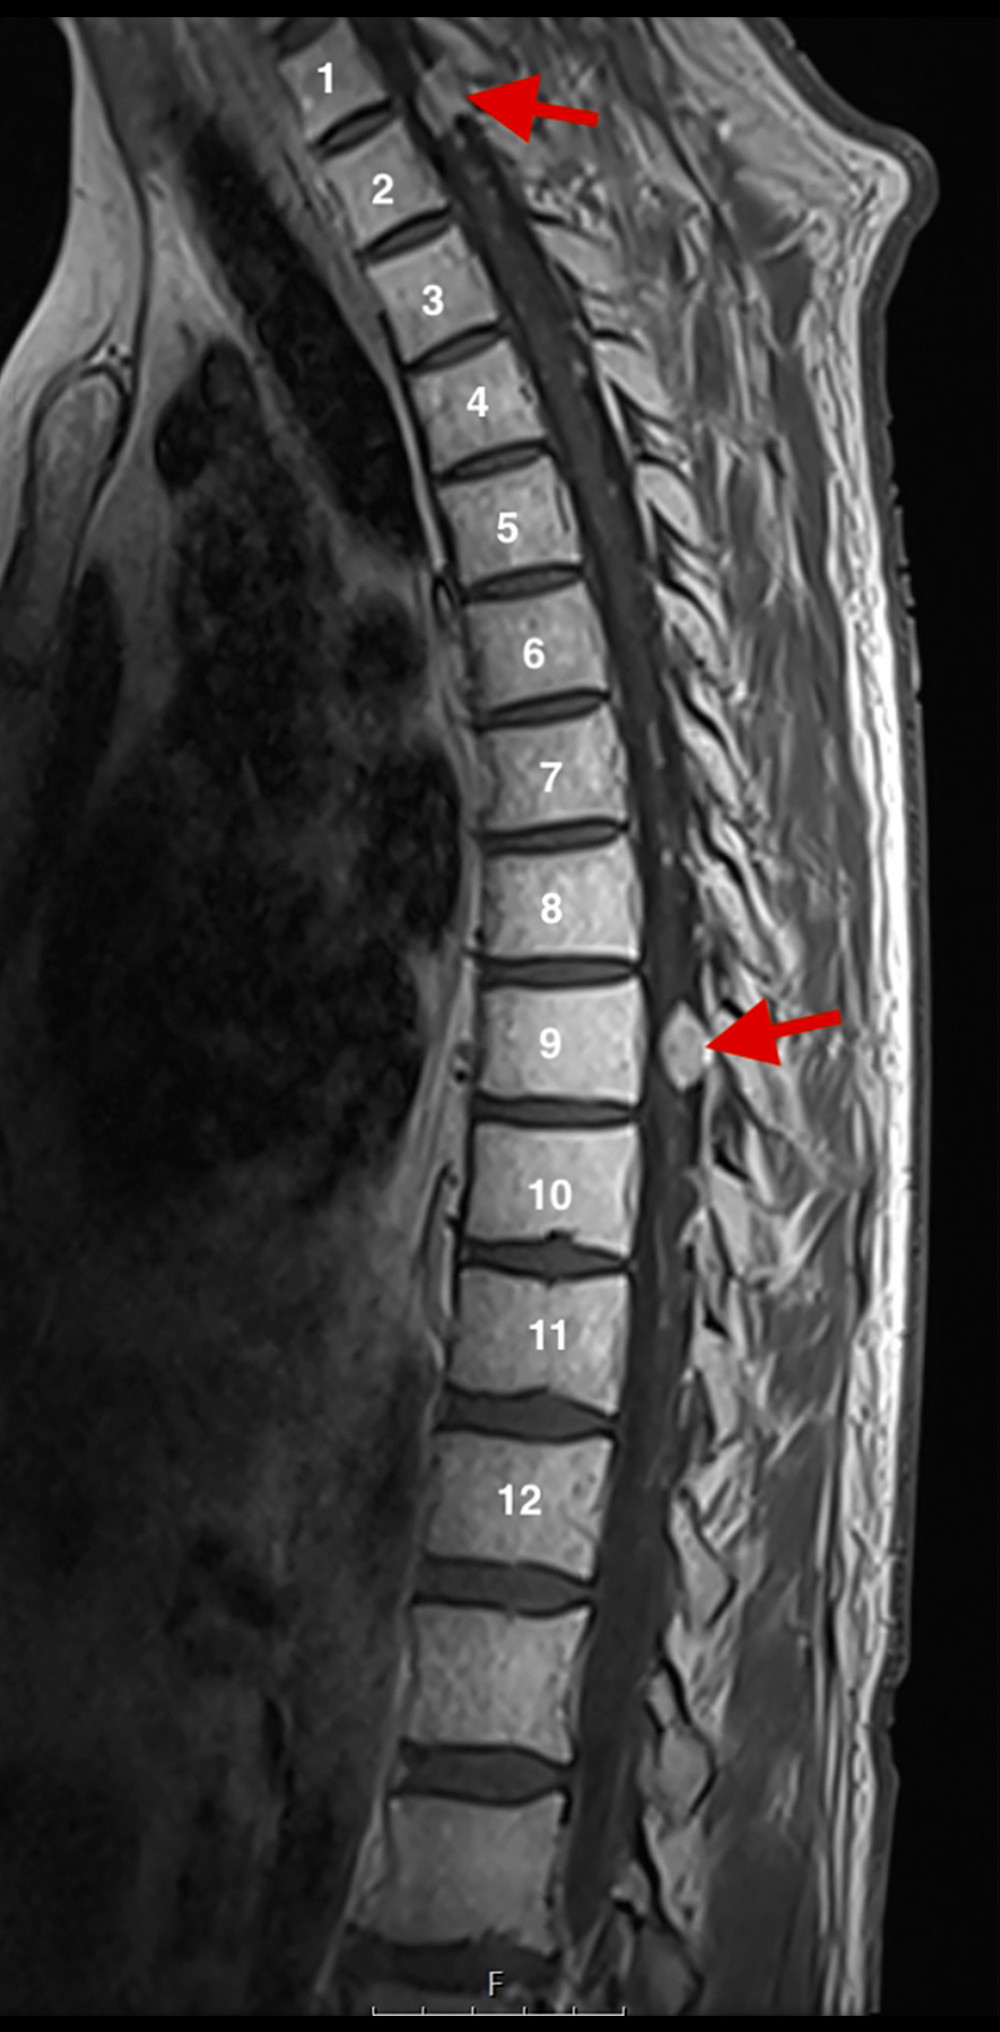 T1-weighted sagittal MRI of thoracic spine with intravenous contrast injection before surgery T1 dix sag C+. Pathological masses, most likely metastases, are seen in the spinal canal in the chest area at C7-Th1, Th1-Th2, and Th10 levels (arrows).